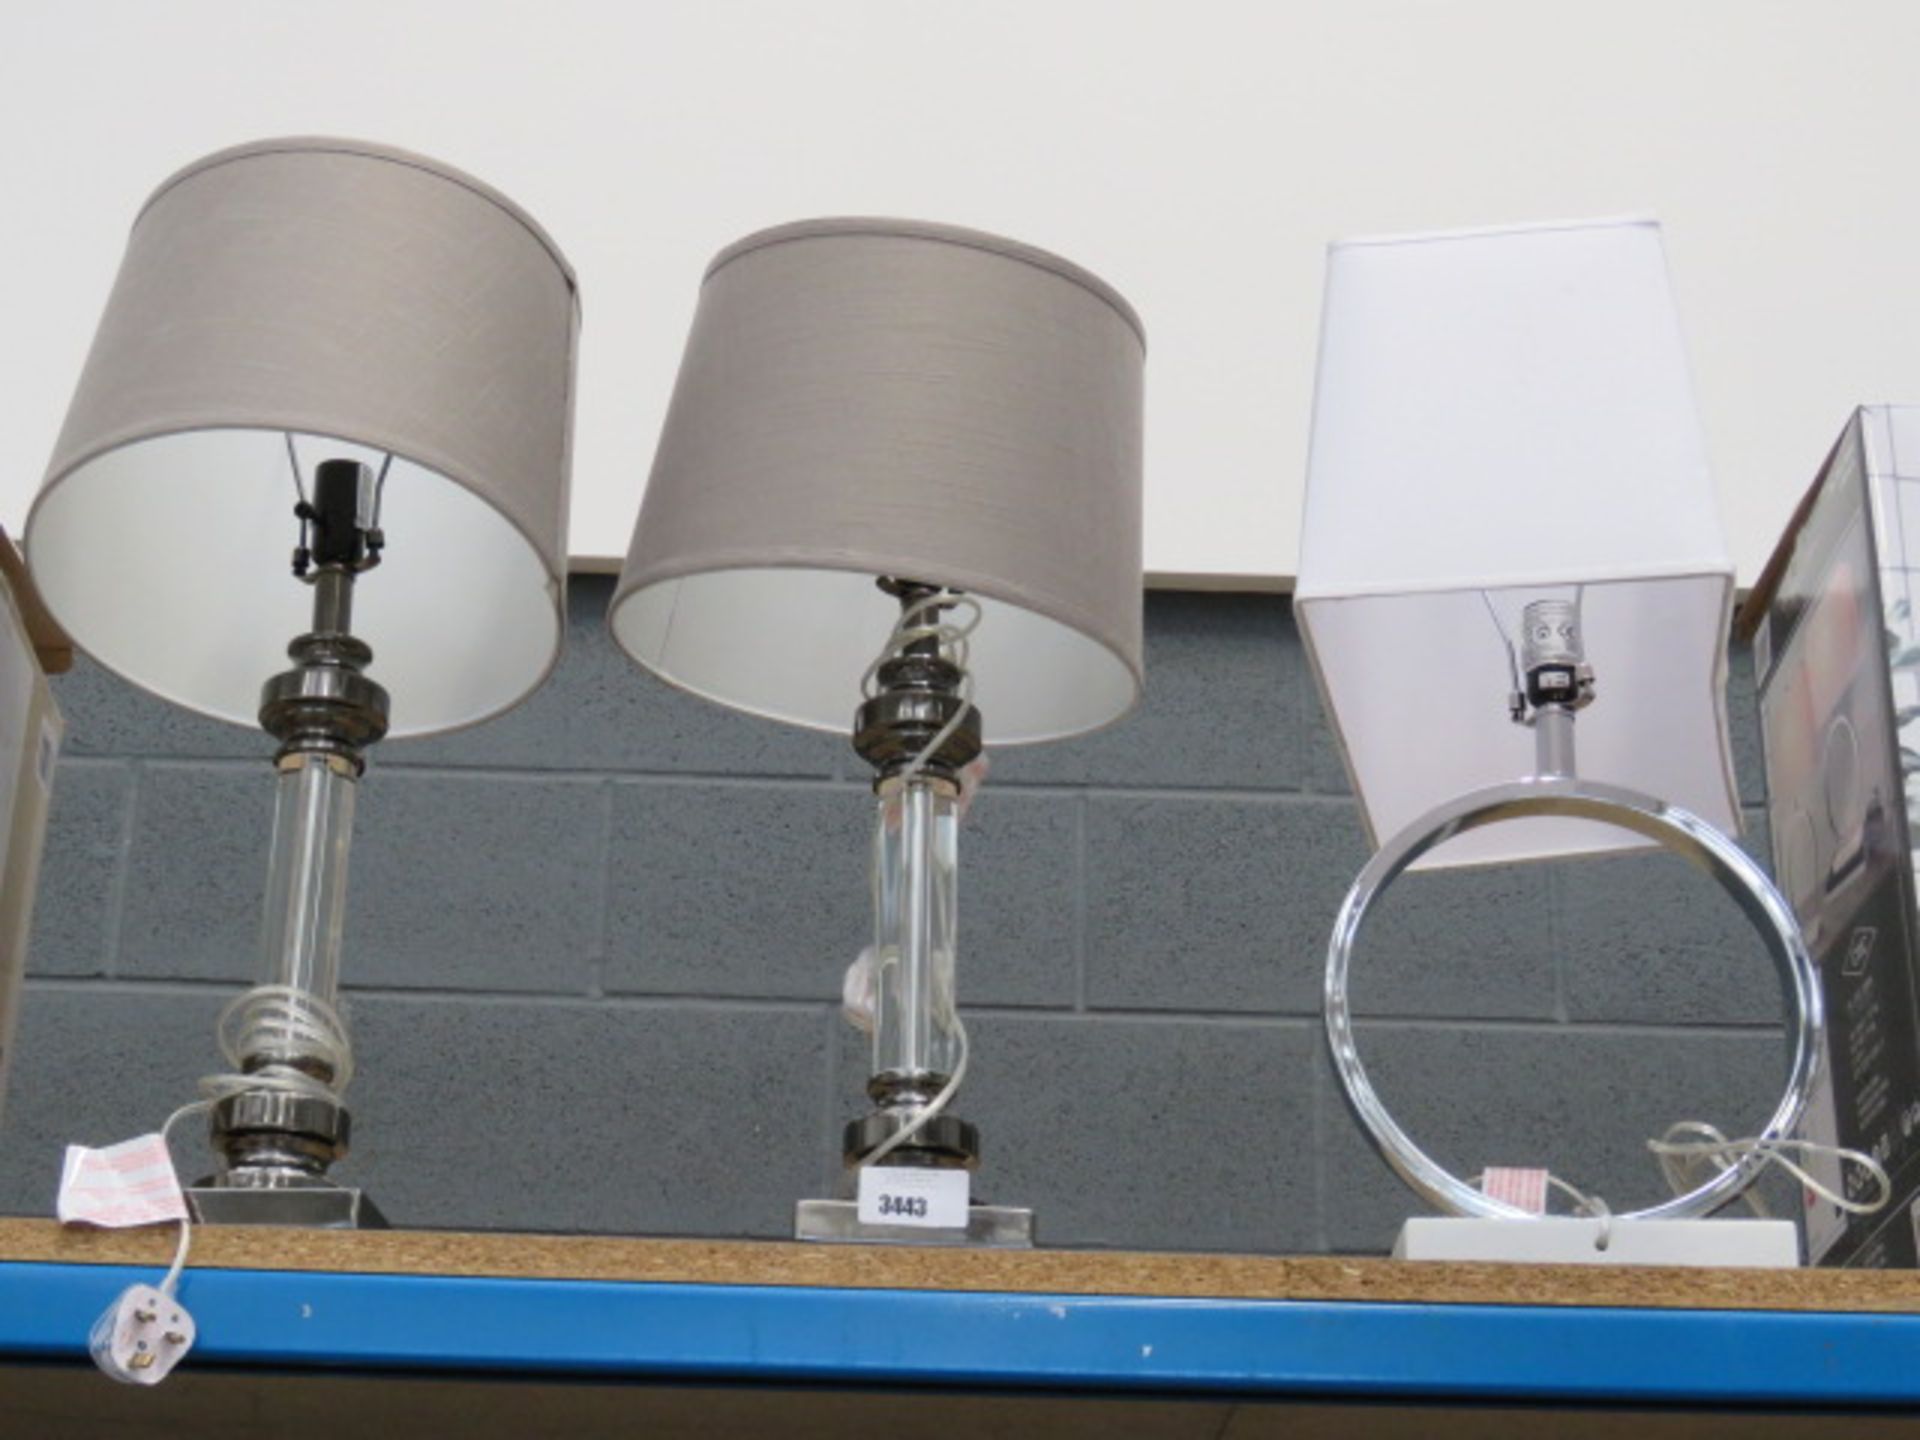 3x unboxed mixed style table lamps